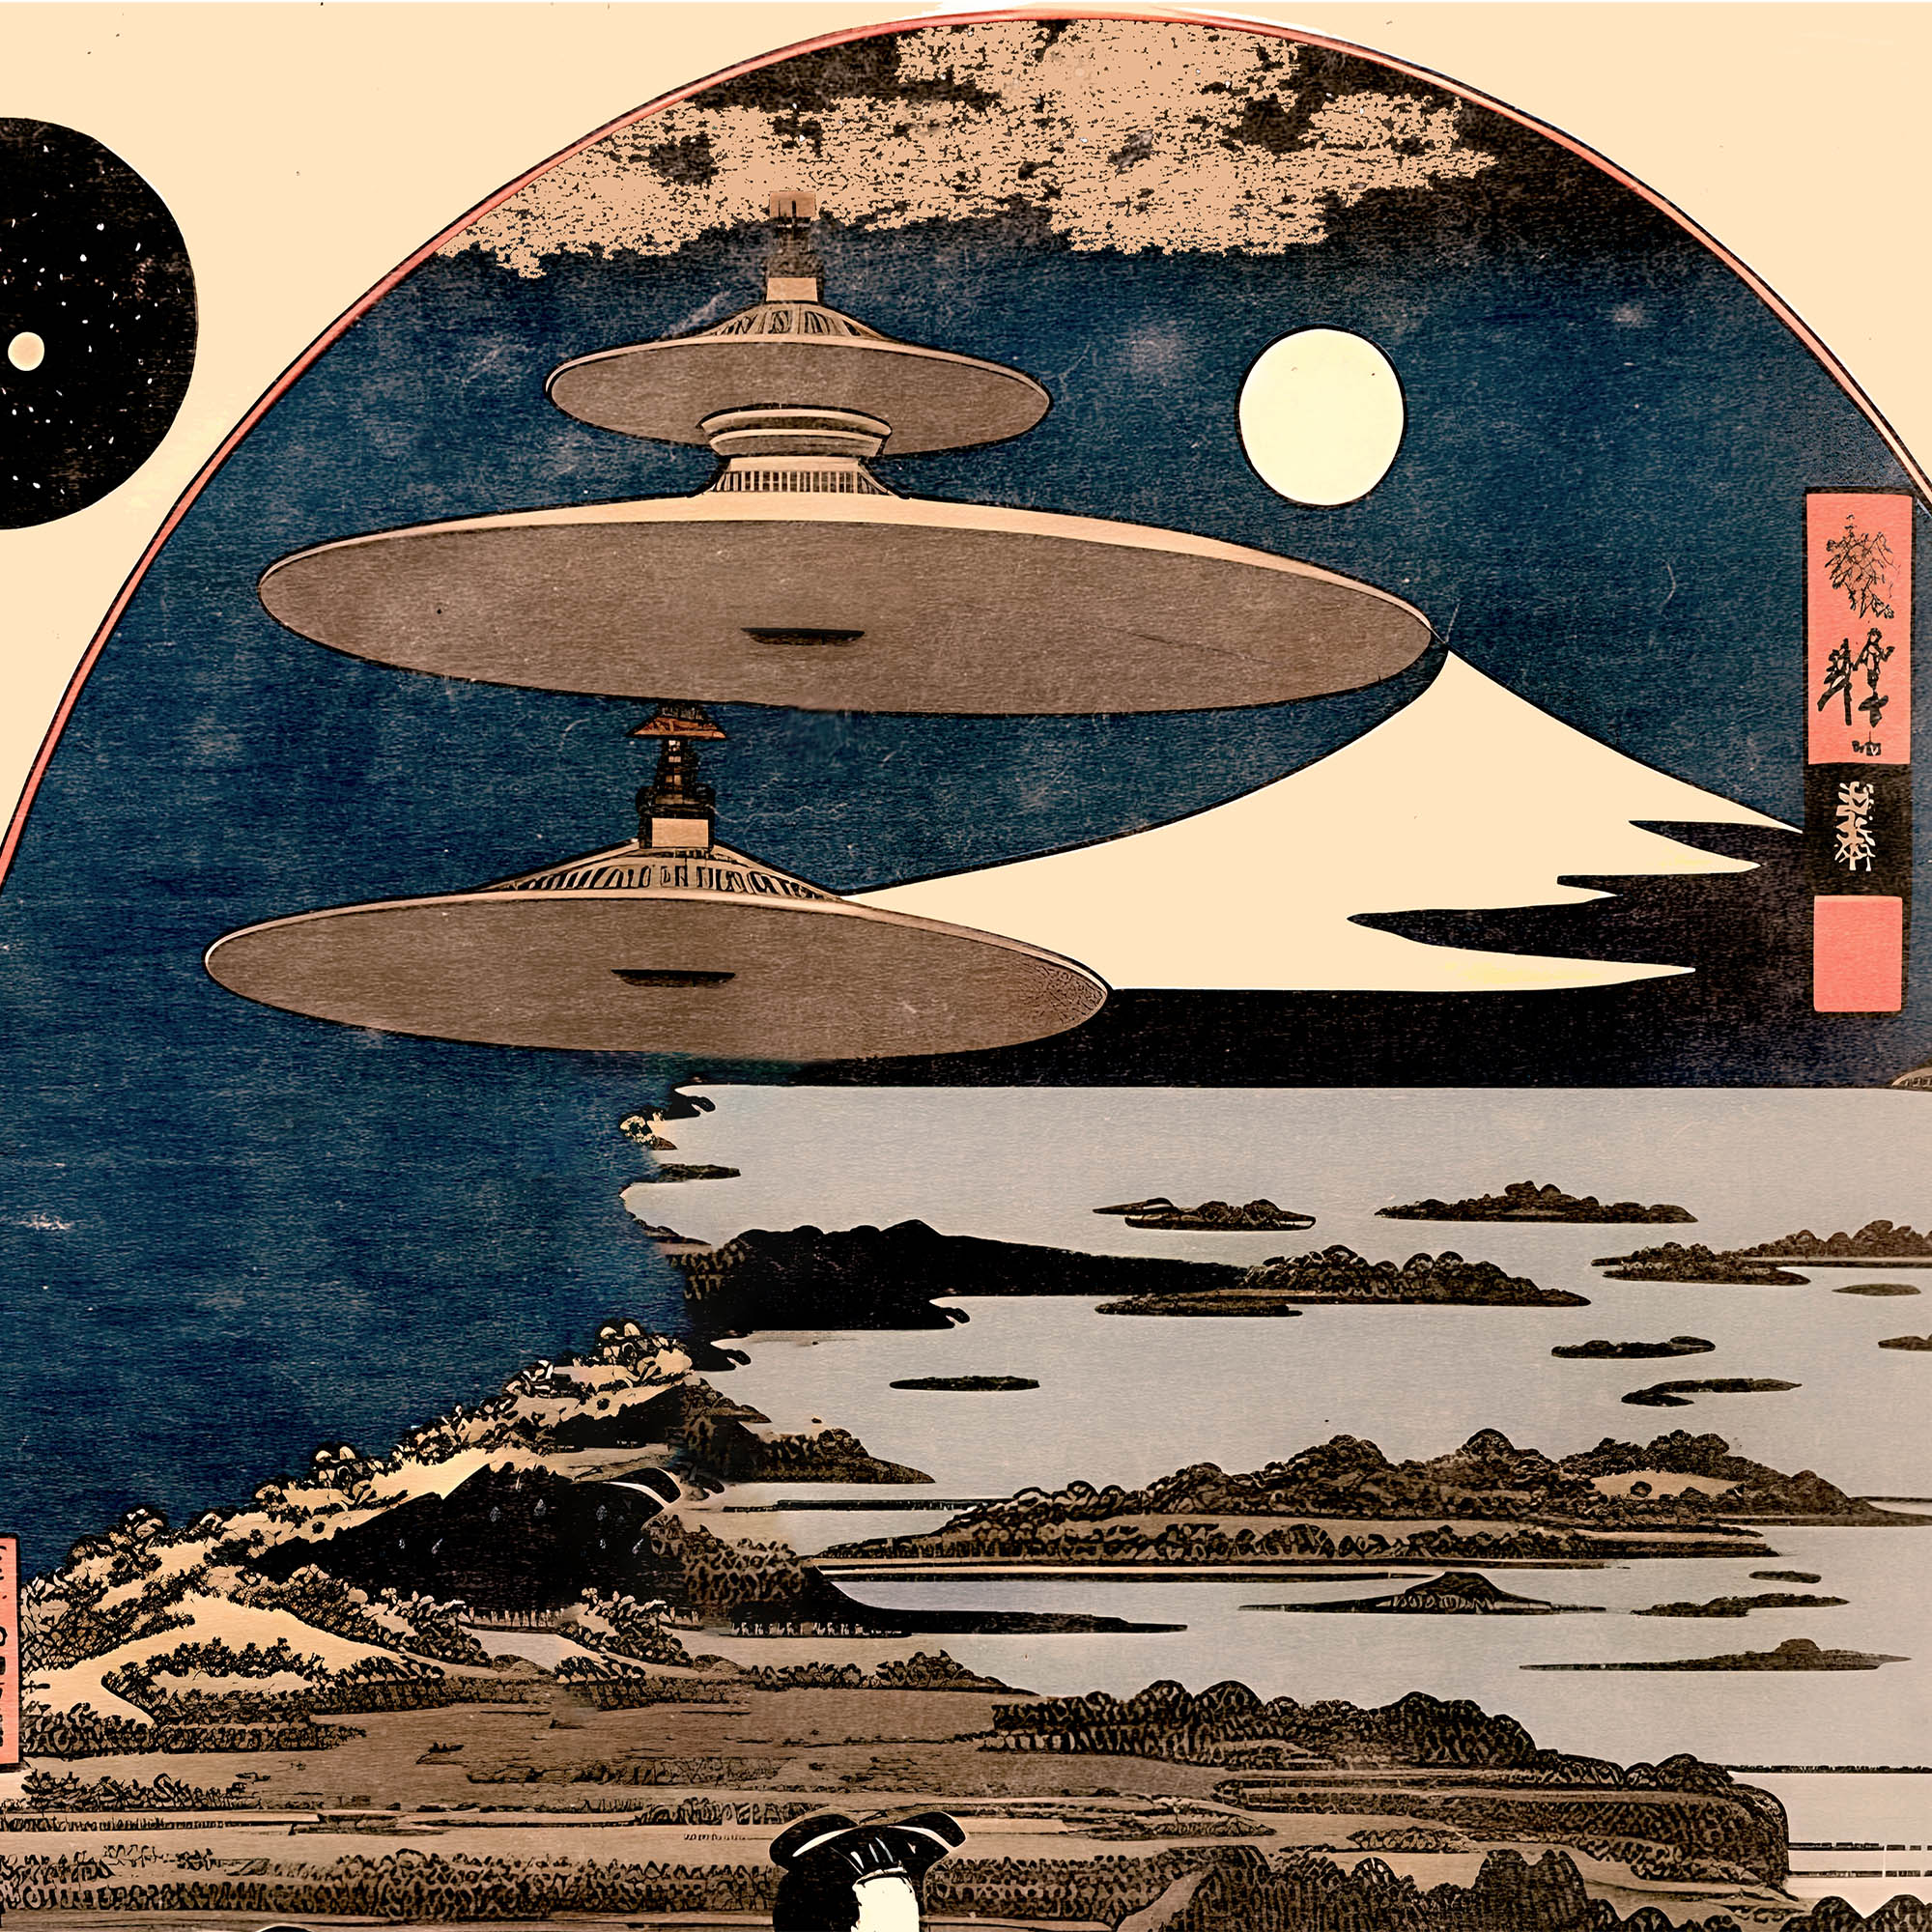 T-Shirts XS / Natural UFO Space Alien Invasion | Extraterrestrial Vintage Ukiyo-e 19th-Century Surreal Graphic Art T-Shirt